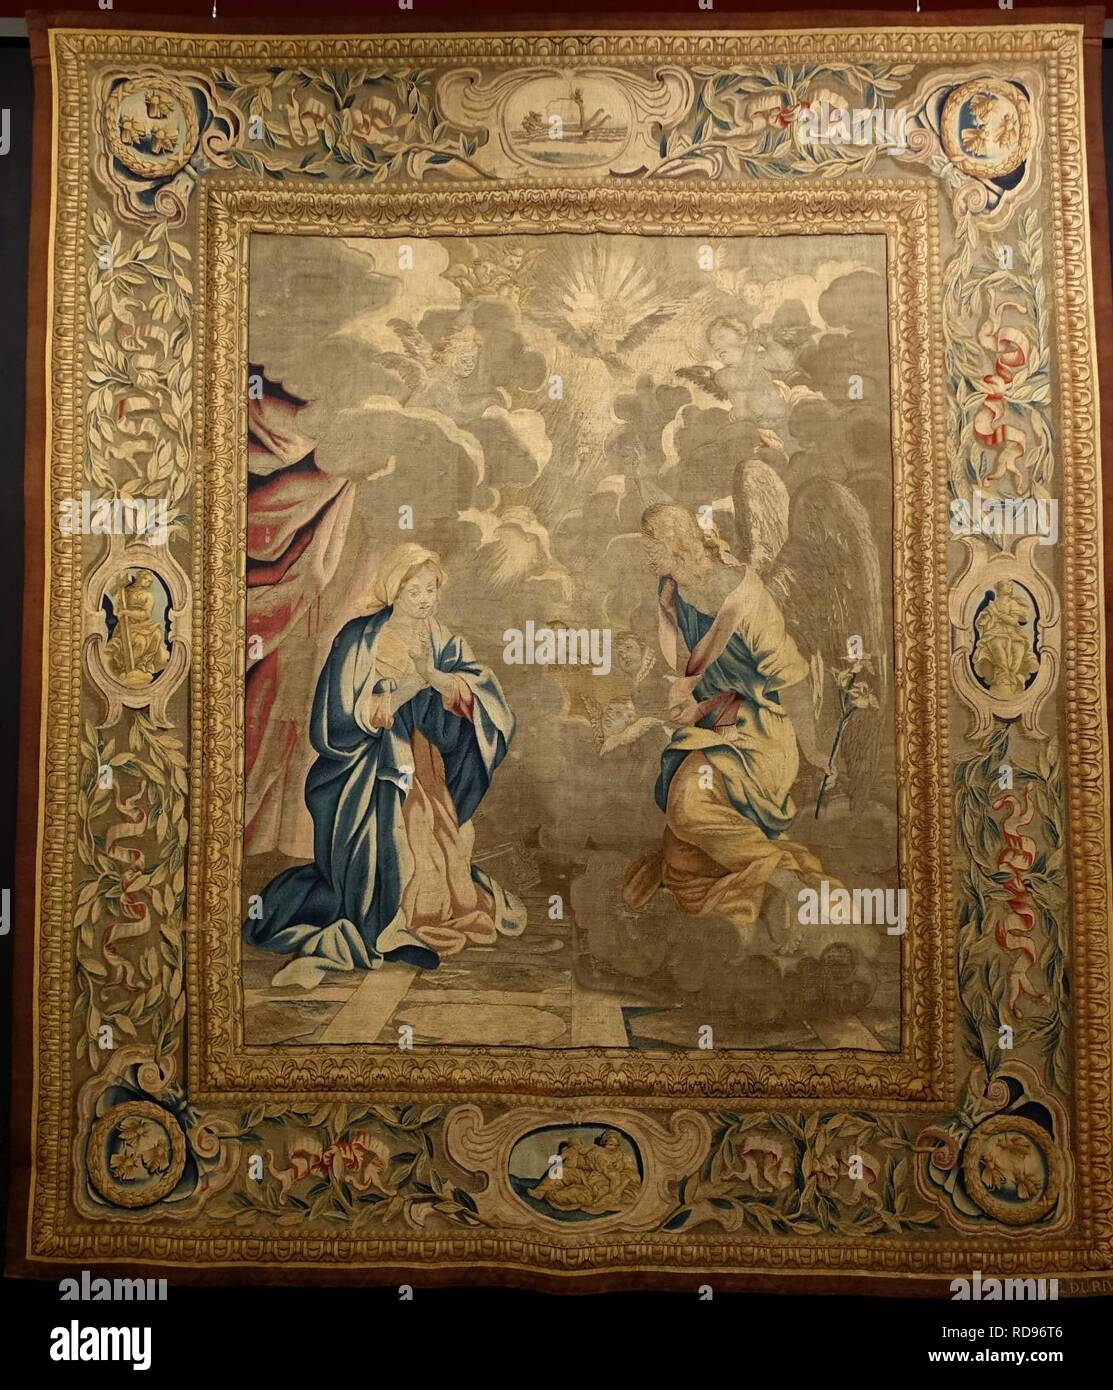 Annunciation, from the Life of Christ, Barberini Tapestries, Rome, 1644-1656 - Jordan Schnitzer Stock Photo